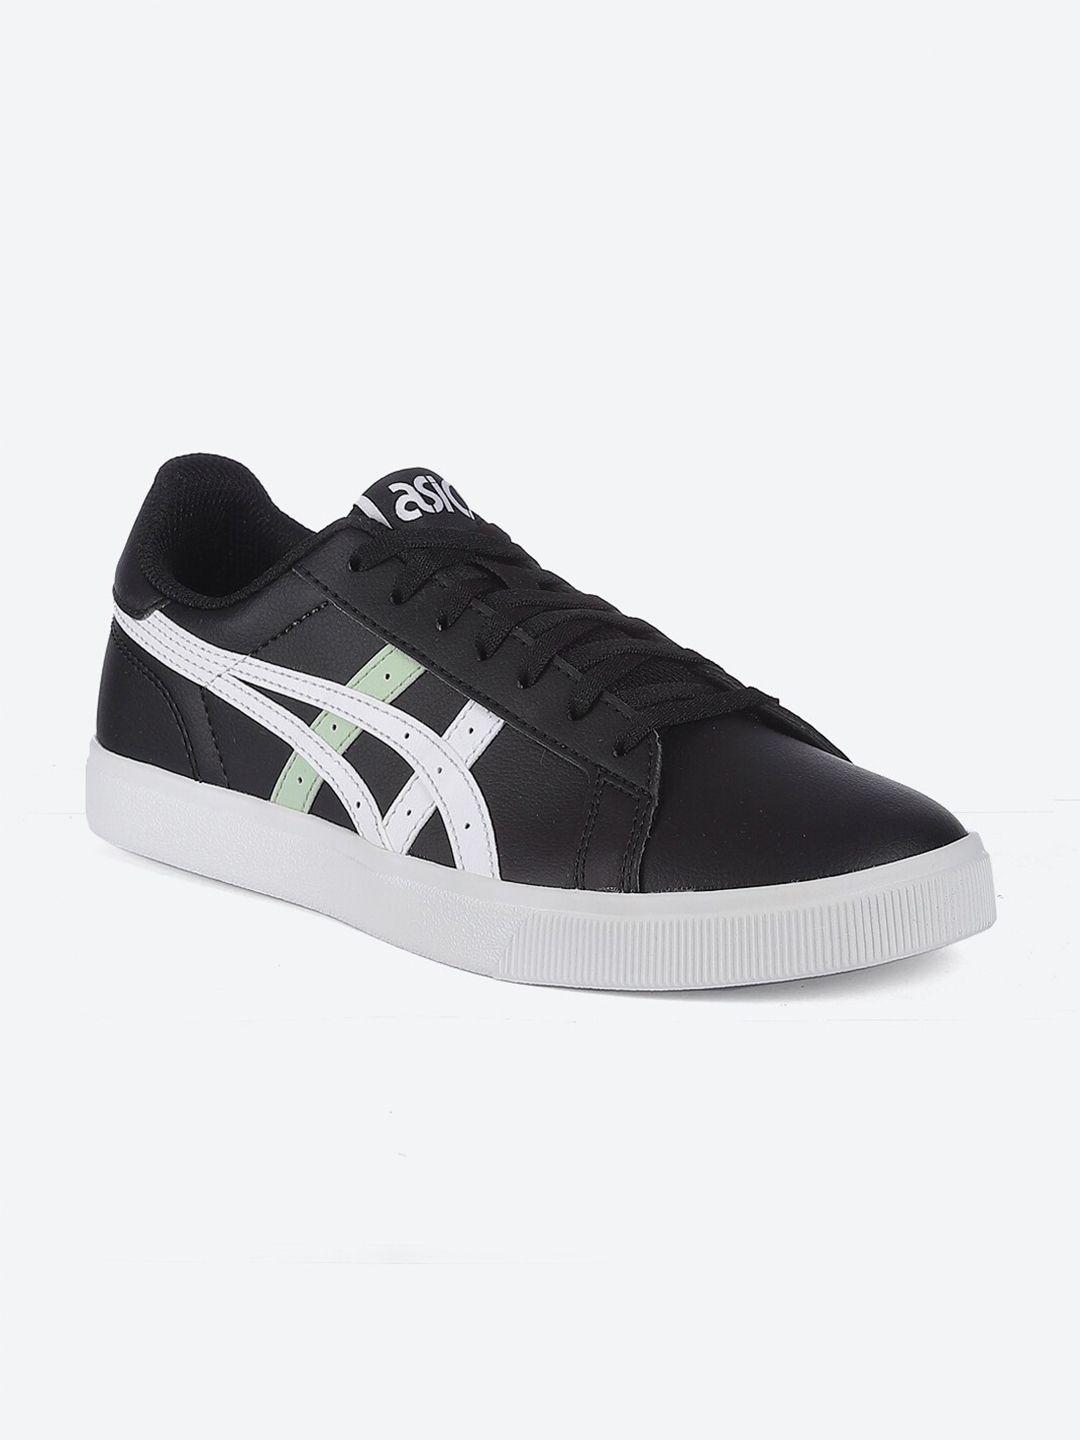 ASICS Women Black Classic CT Sports Shoes Price in India